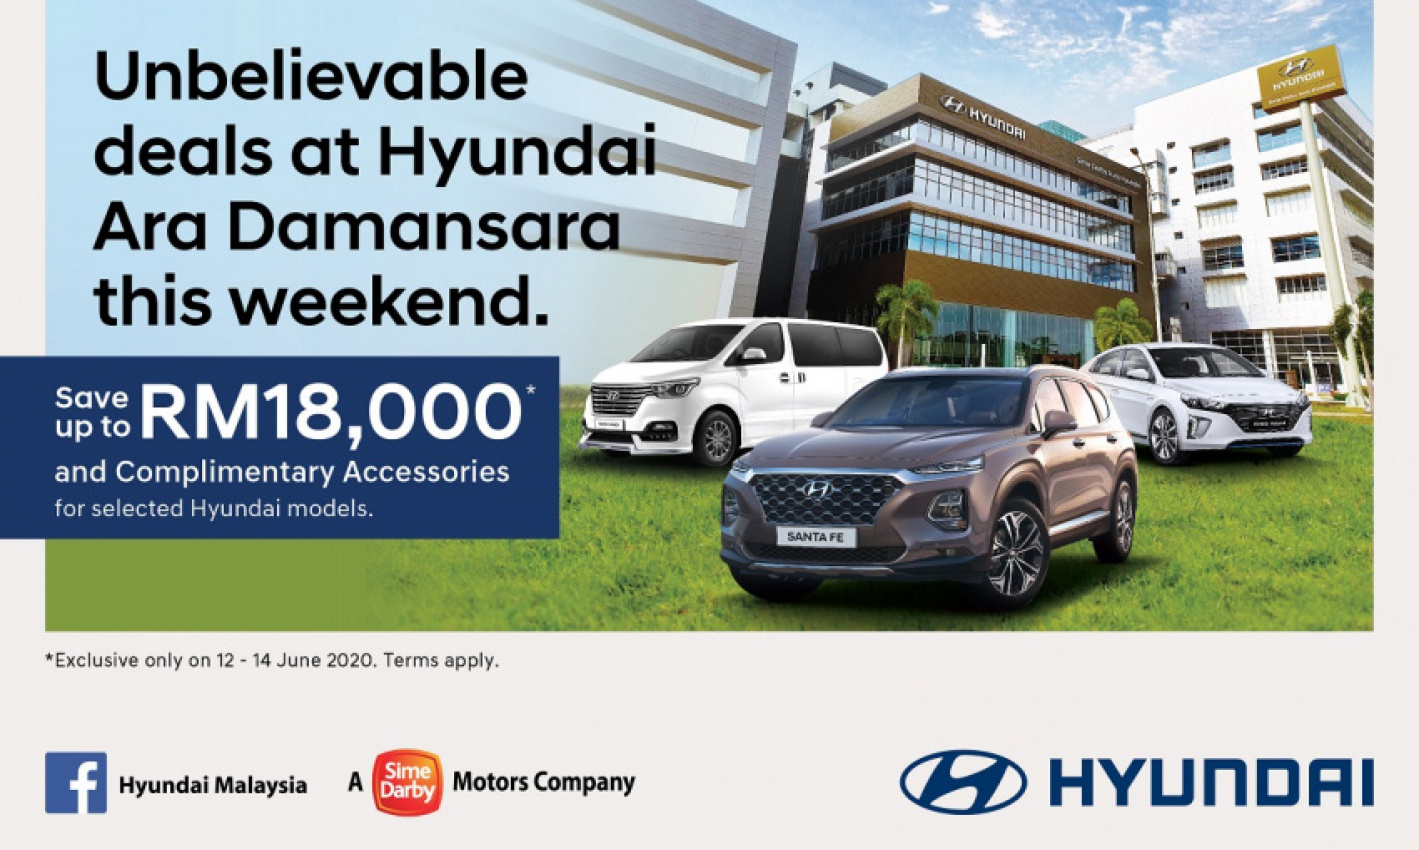 autos, car brands, cars, hyundai, automotive, cars, hyundai-sime darby motors, malaysia, promotions, rebates, sales, sime darby, sime darby auto hyundai, hyundai deals this weekend offers rebates up to rm18,000